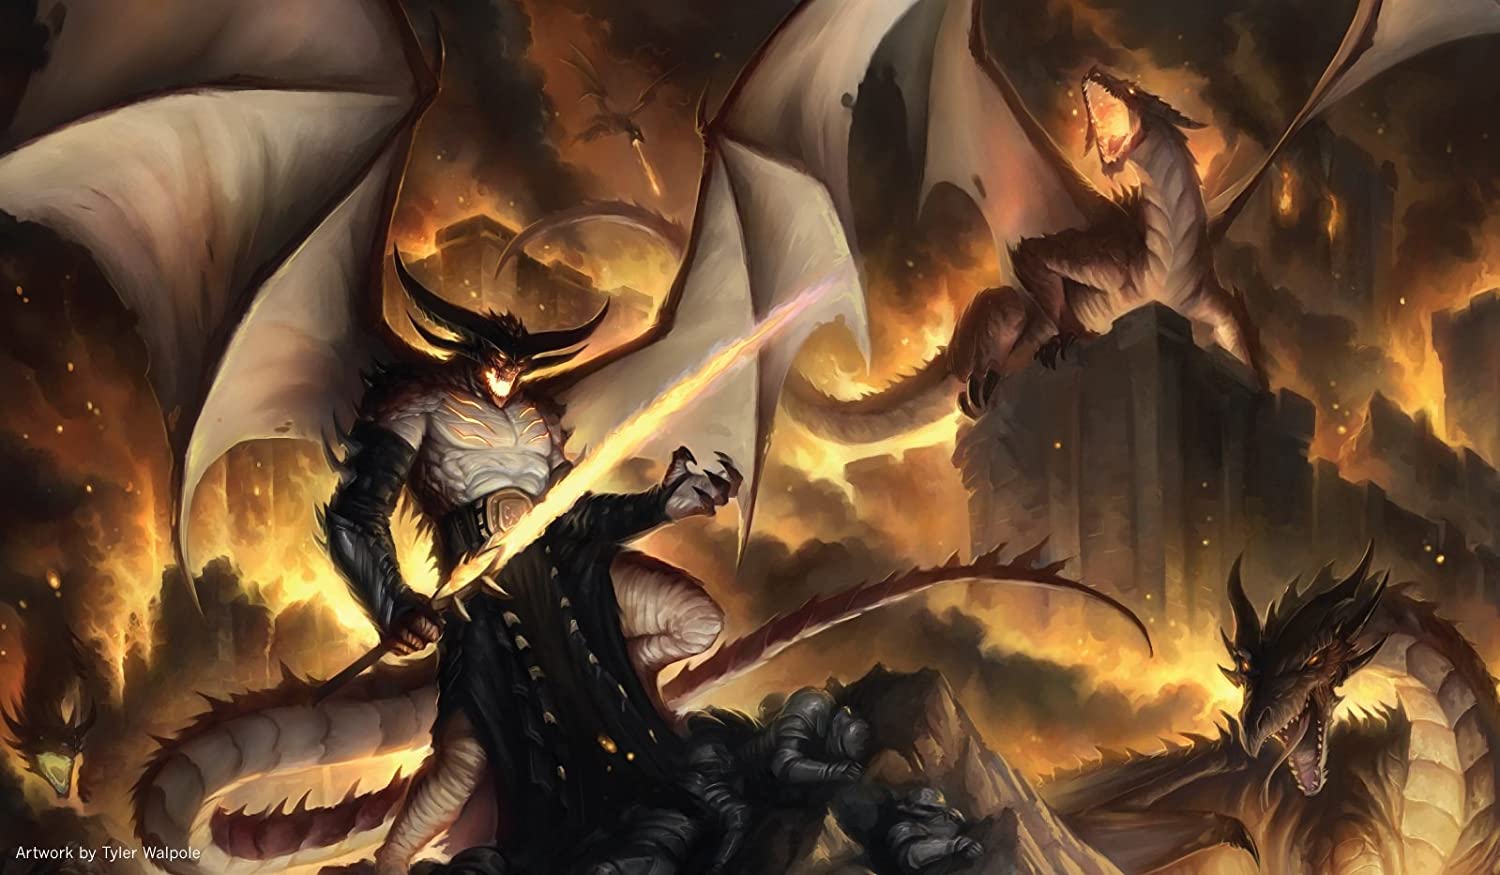 Artists of Magic Premium Playmat for Magic the Gathering and Other Collectible Card Games